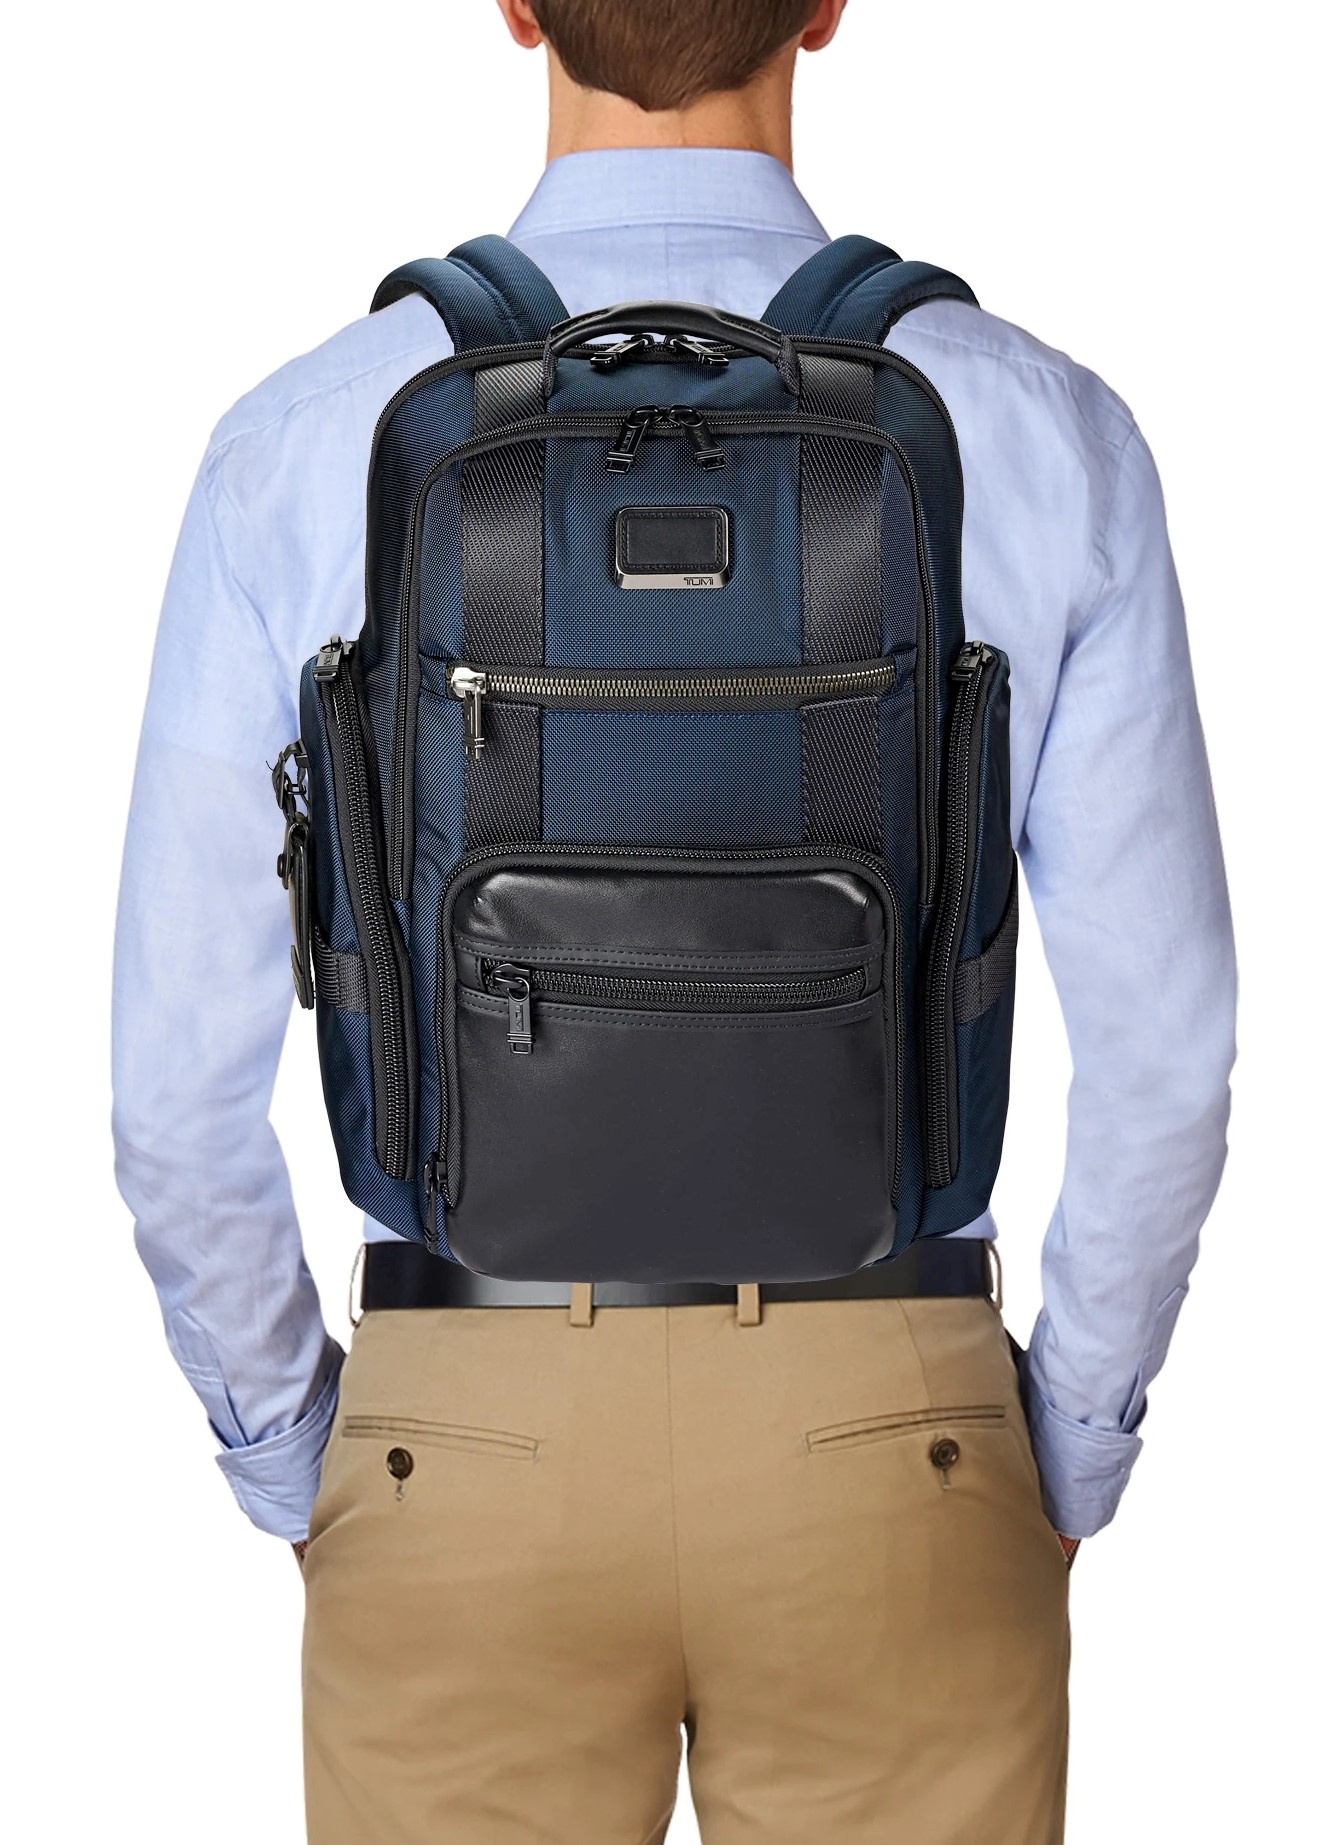 BALO NAM TUMI SHEPPARD DELUXE BRIEF PACK ALPHA BRAVO BACKPACK NEW 24